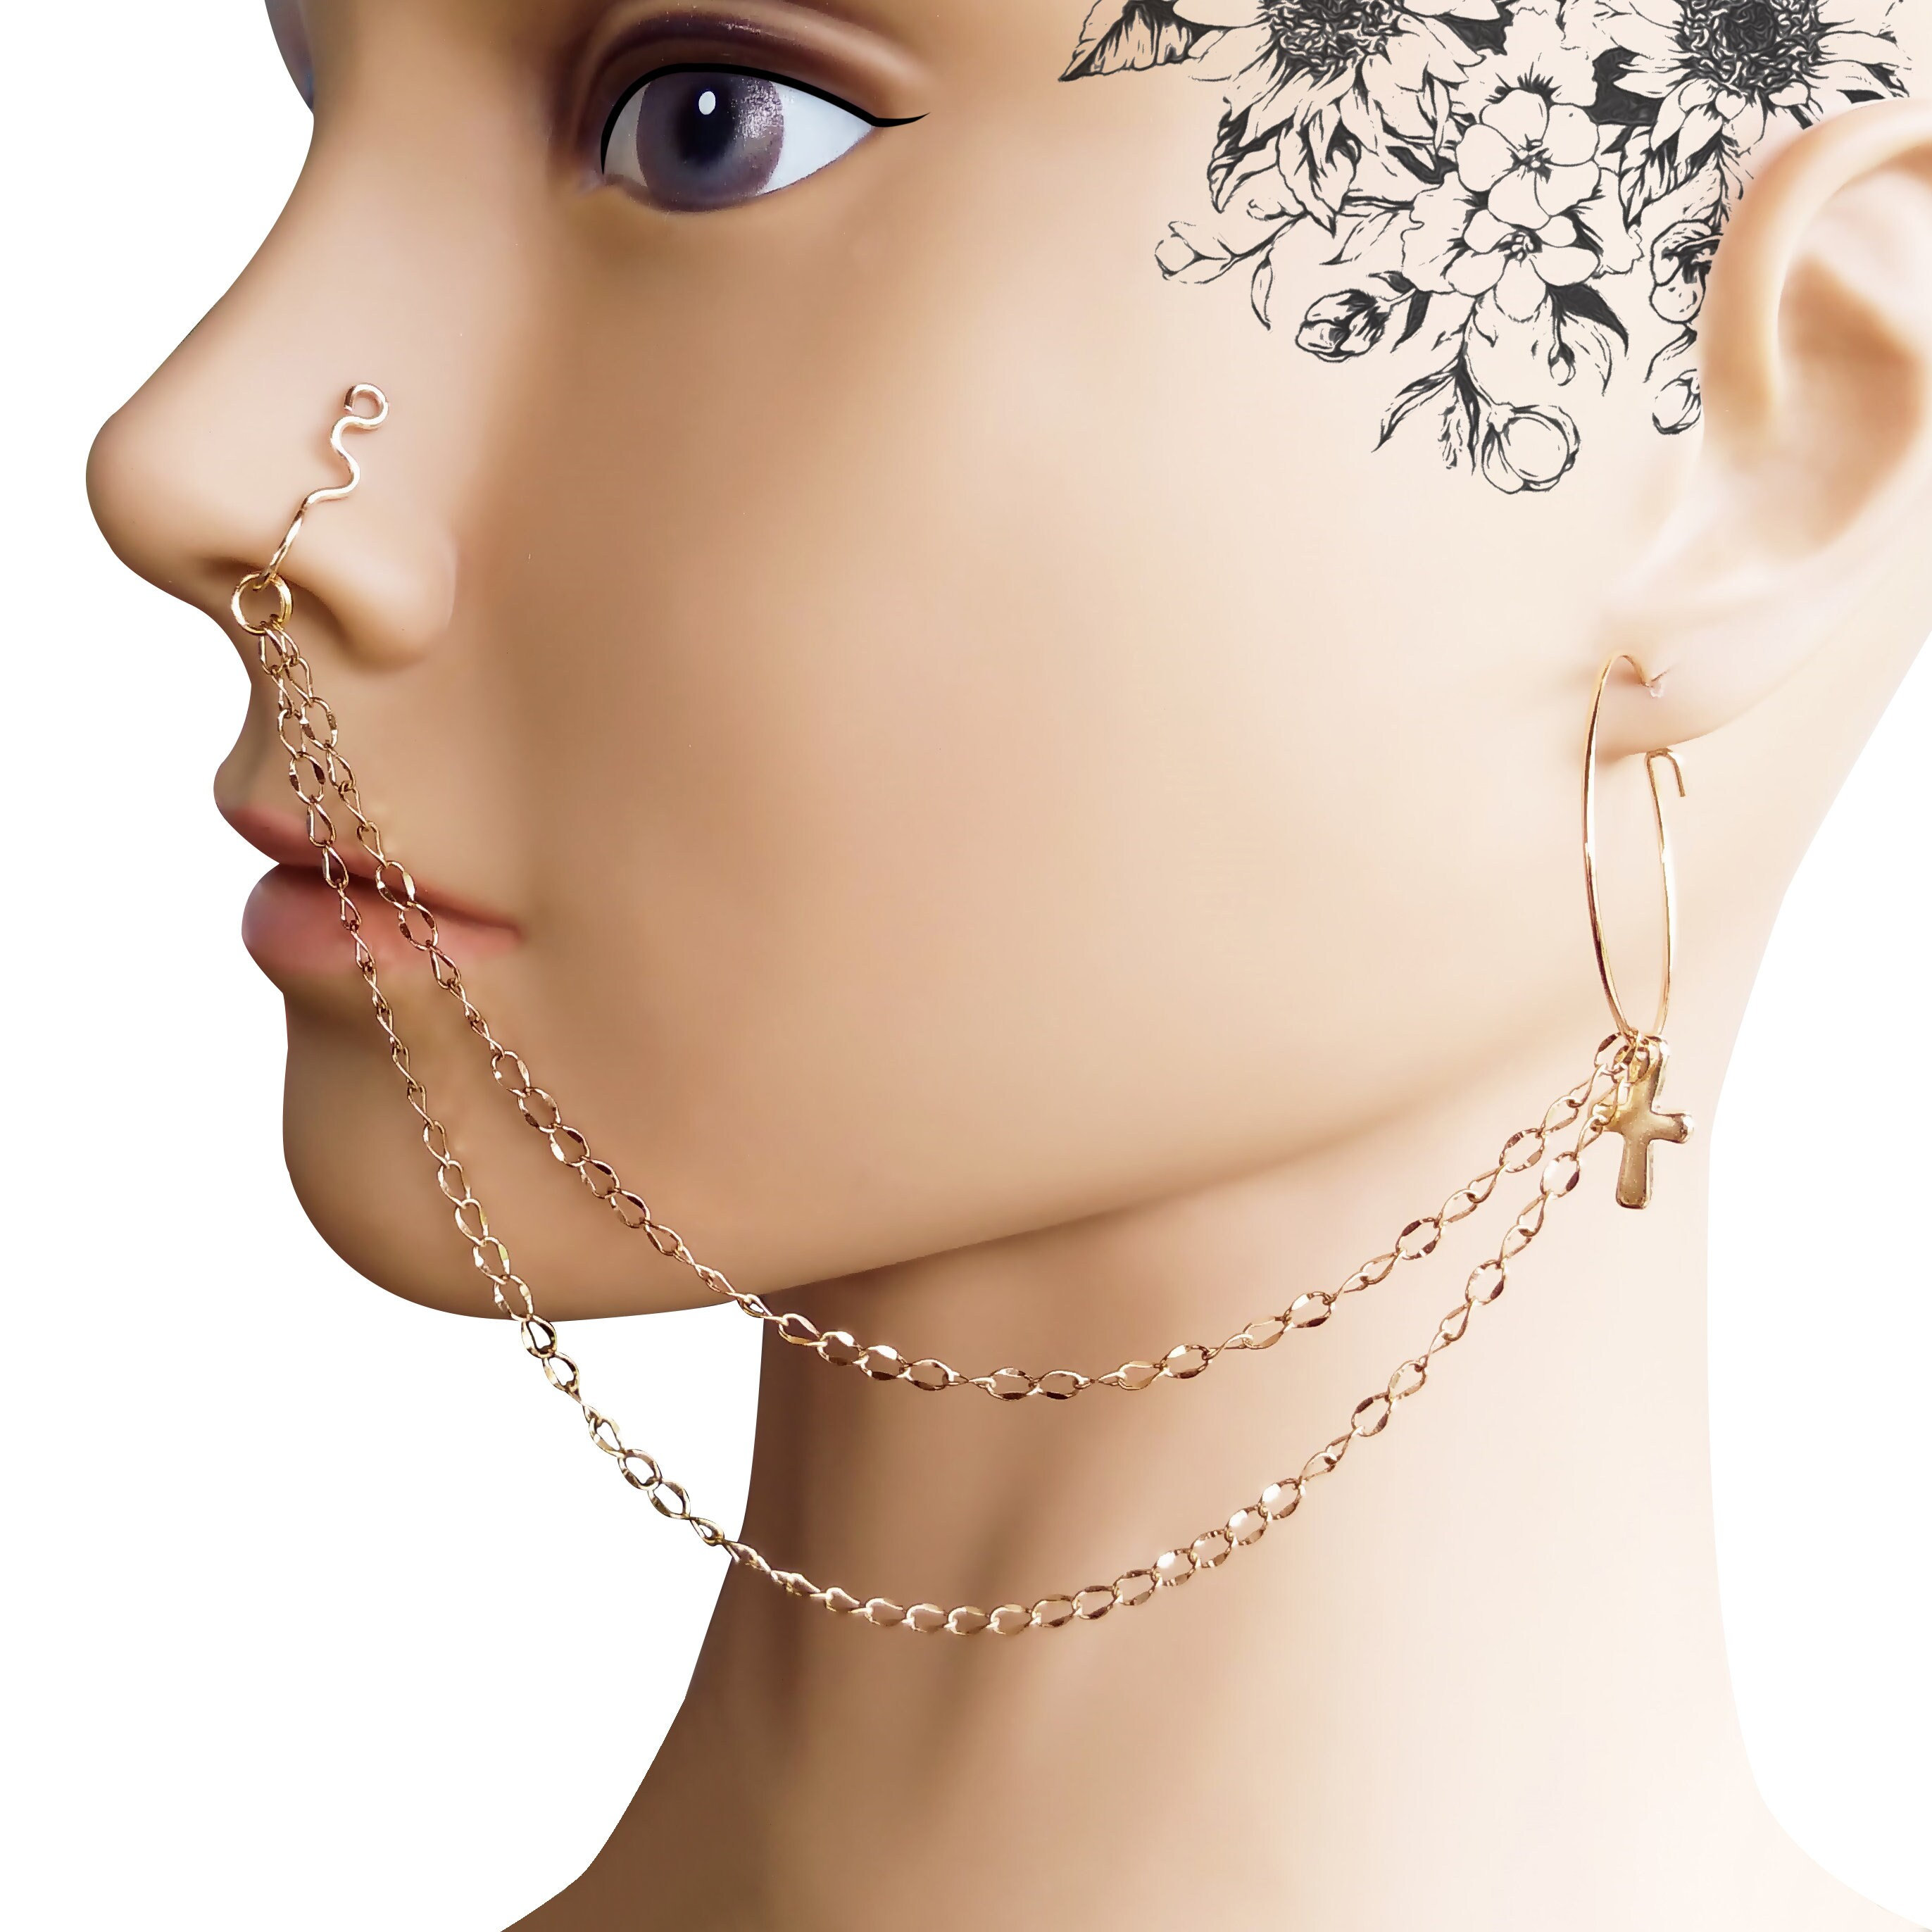 Give Me Flowers Nose Cuff and Chain